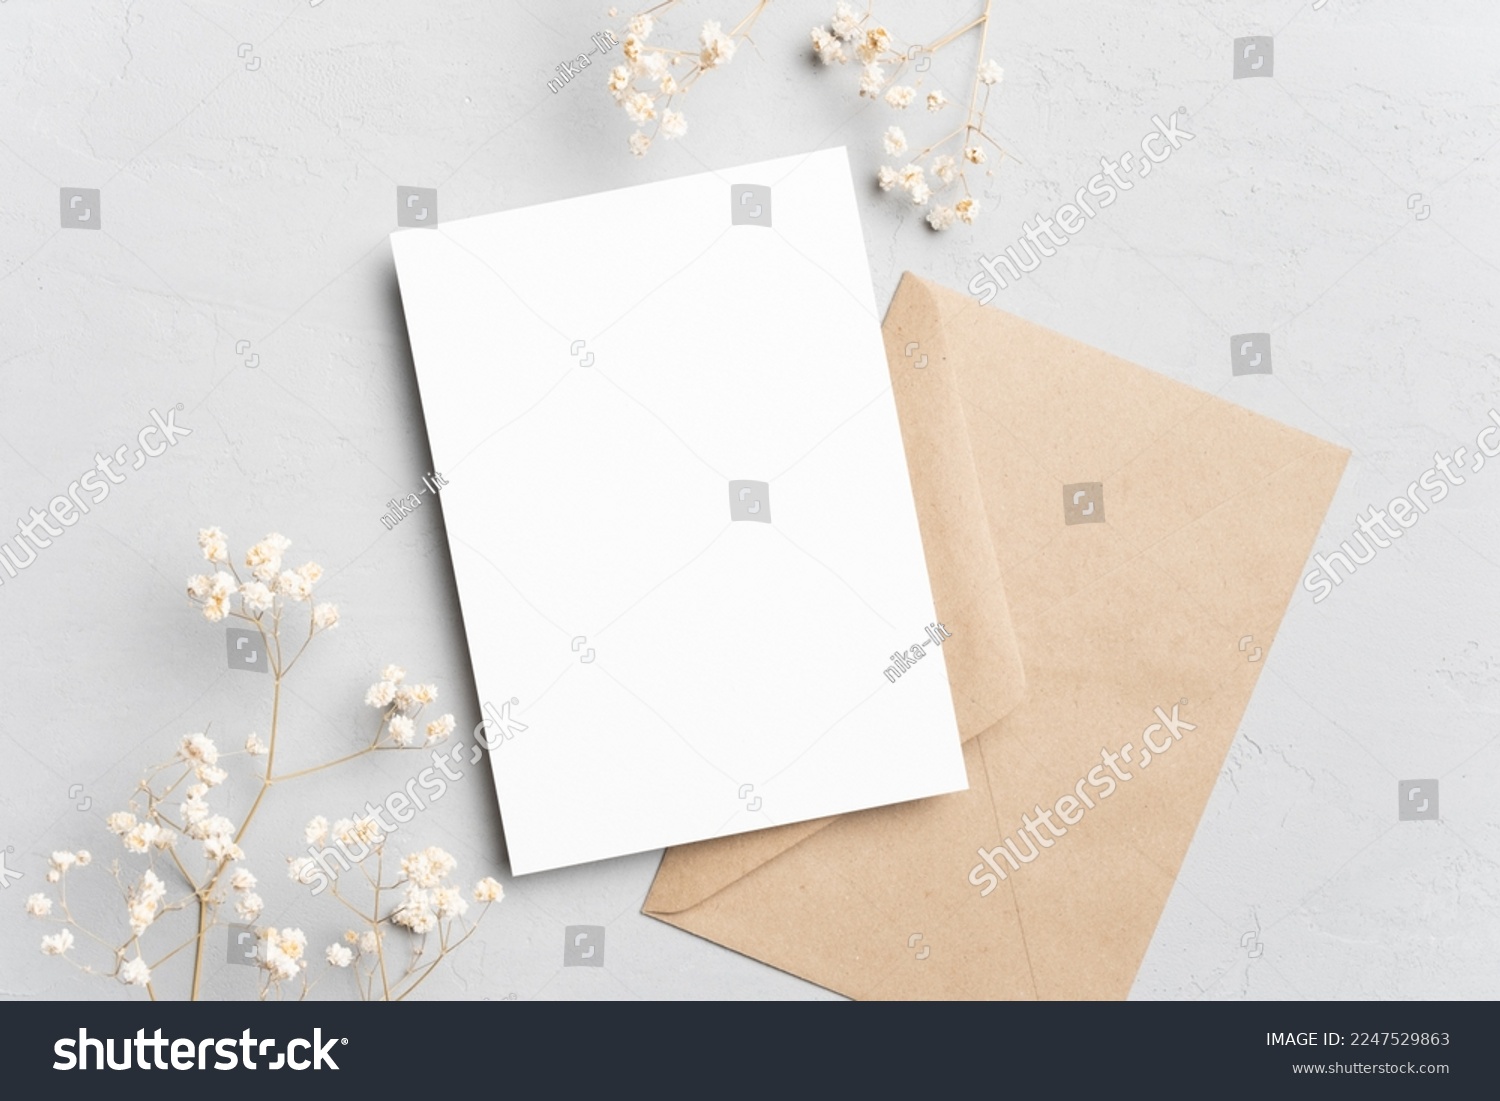 Blank invitation or greeting card mockup with flowers and envelope, wedding card flat lay #2247529863